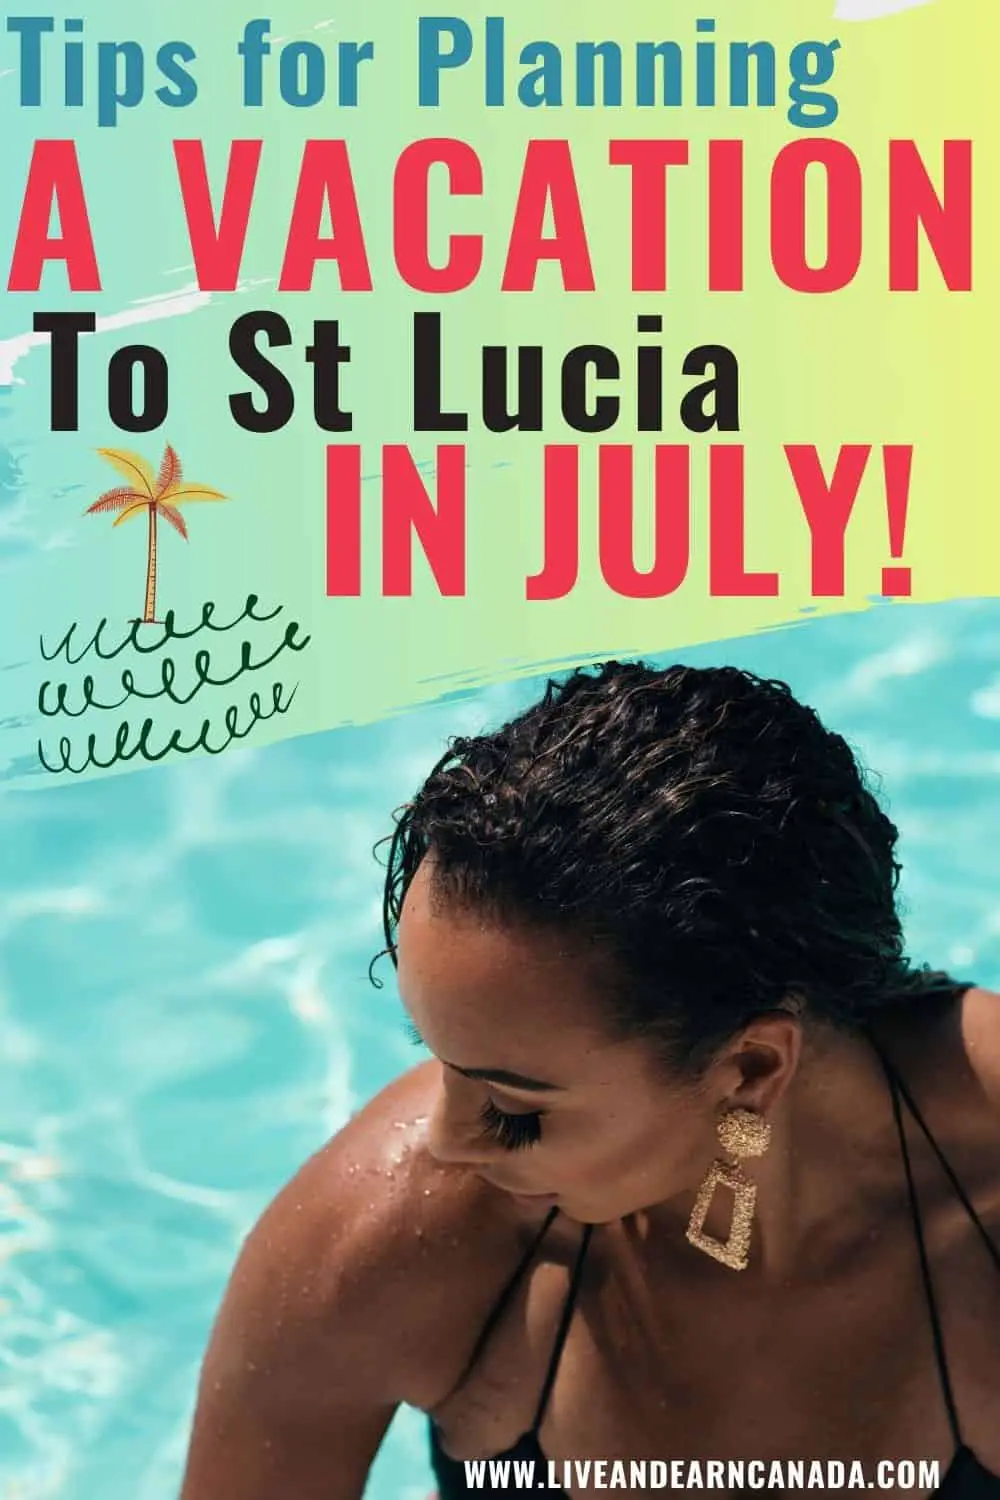 St Lucia Travel tips. Here is our best tips for visiting St Lucia in July. We have also included a list of things to do in St Lucia in July. If you are looking for the best resorts in St Lucia, check out the post. All inclusive resorts in St Lucia, things to do in St Lucia, when to visit St Lucia, we have all the details. #stlucia #visitstlucia